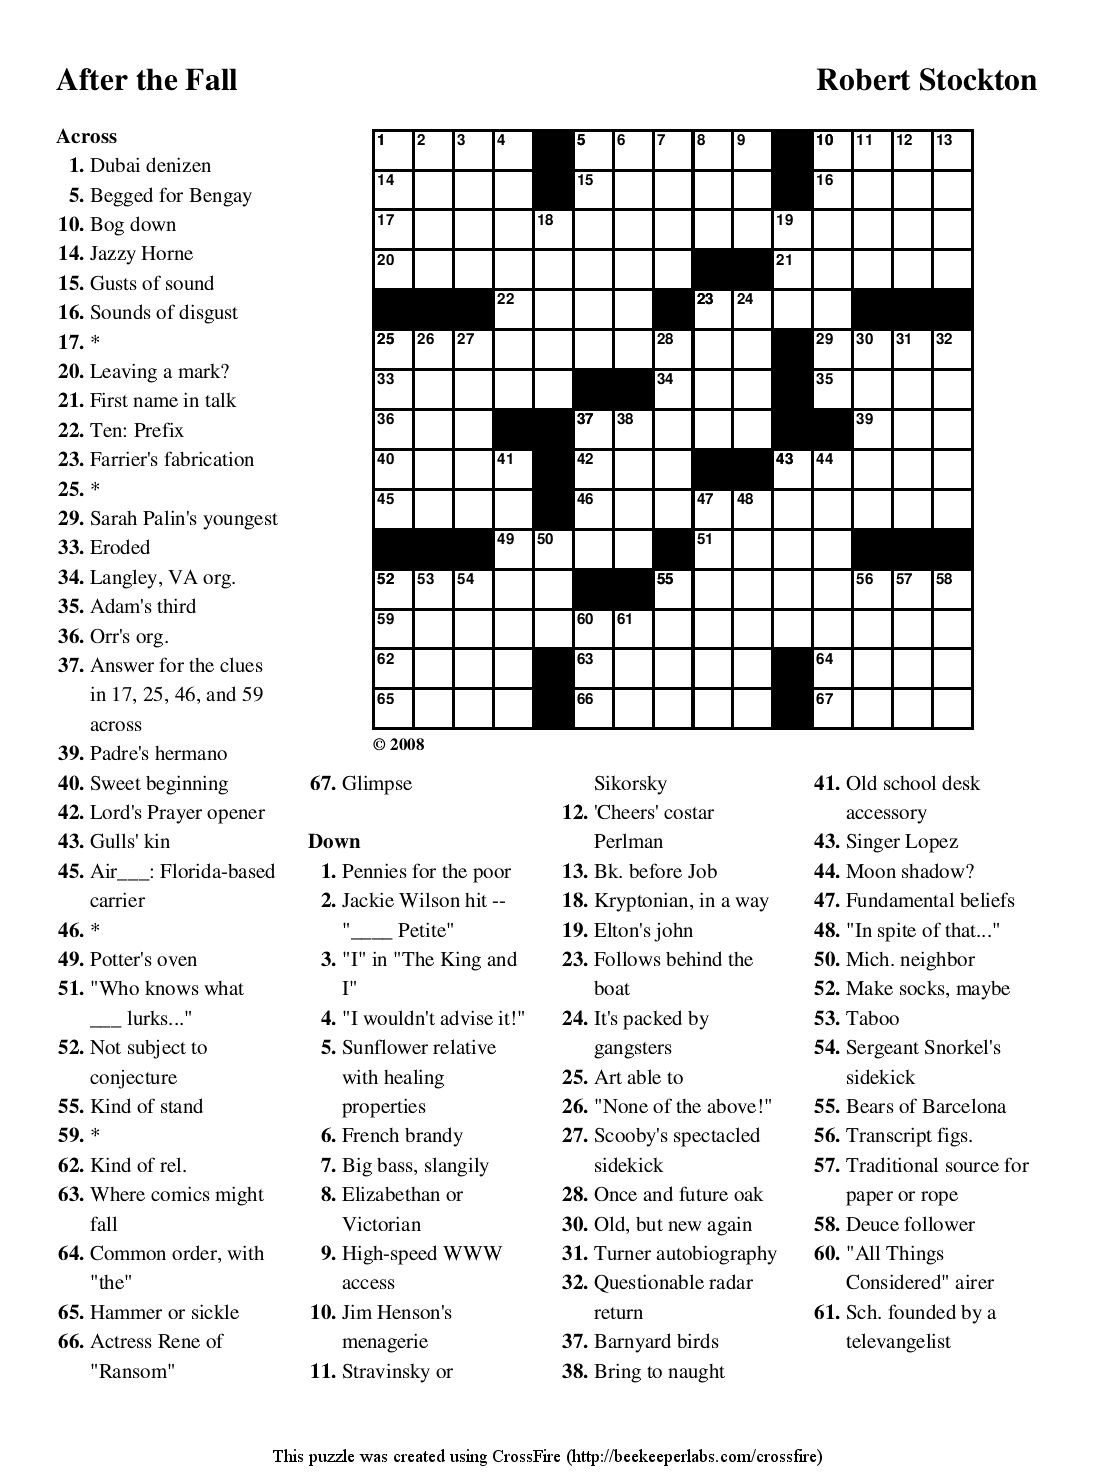 Free Printable Fall Crossword Puzzles For Adults Emma Crossword Puzzles